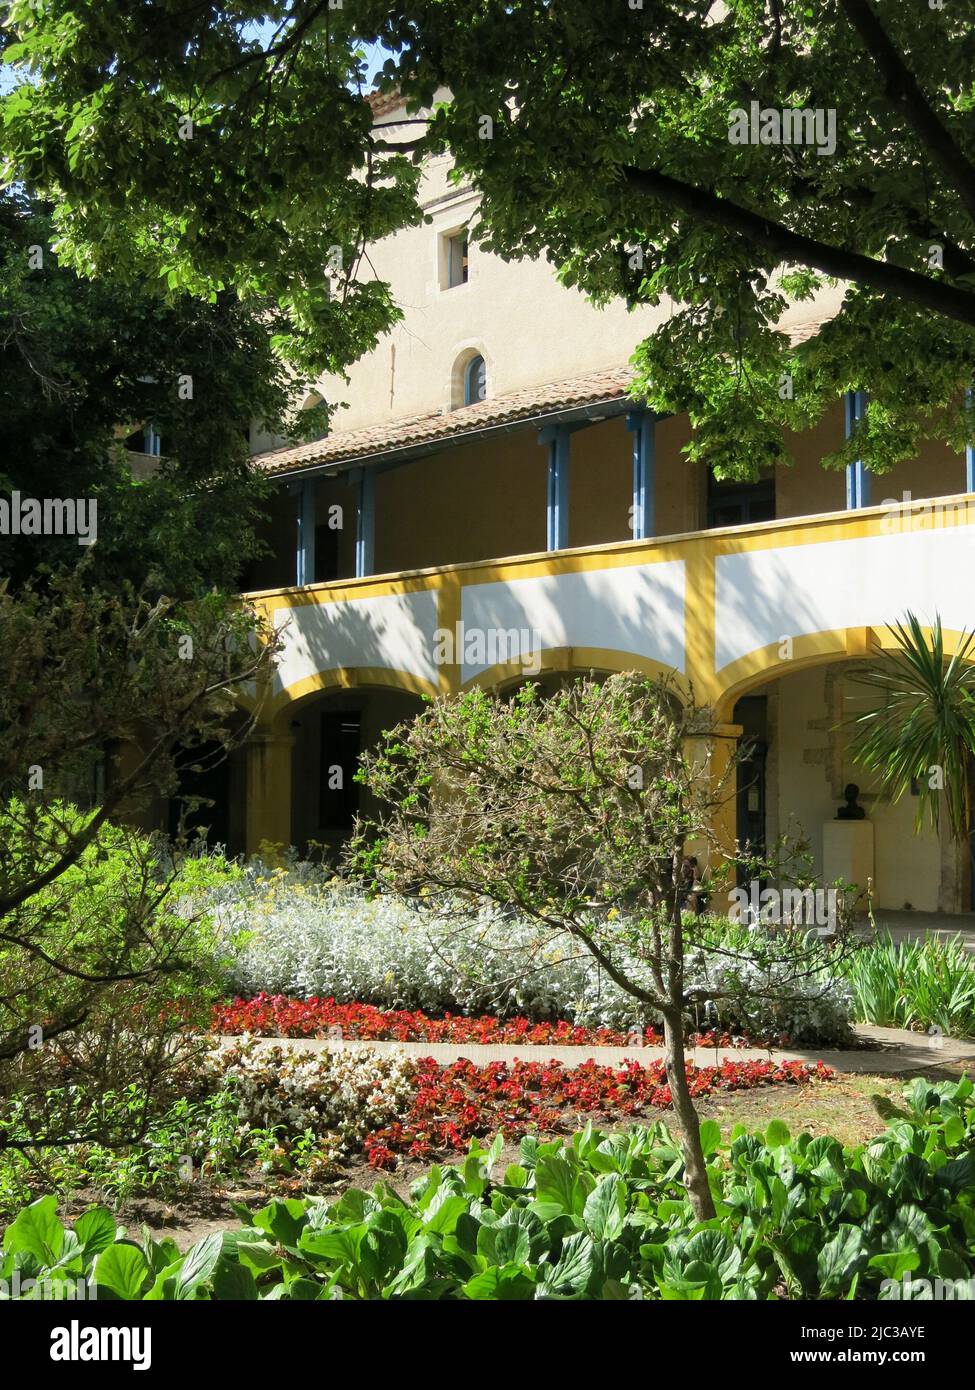 After painting the garden & distinctive yellow arches at the hospital in Arles in 1889, the colourful courtyard is preserved as the Espace Van Gogh. Stock Photo